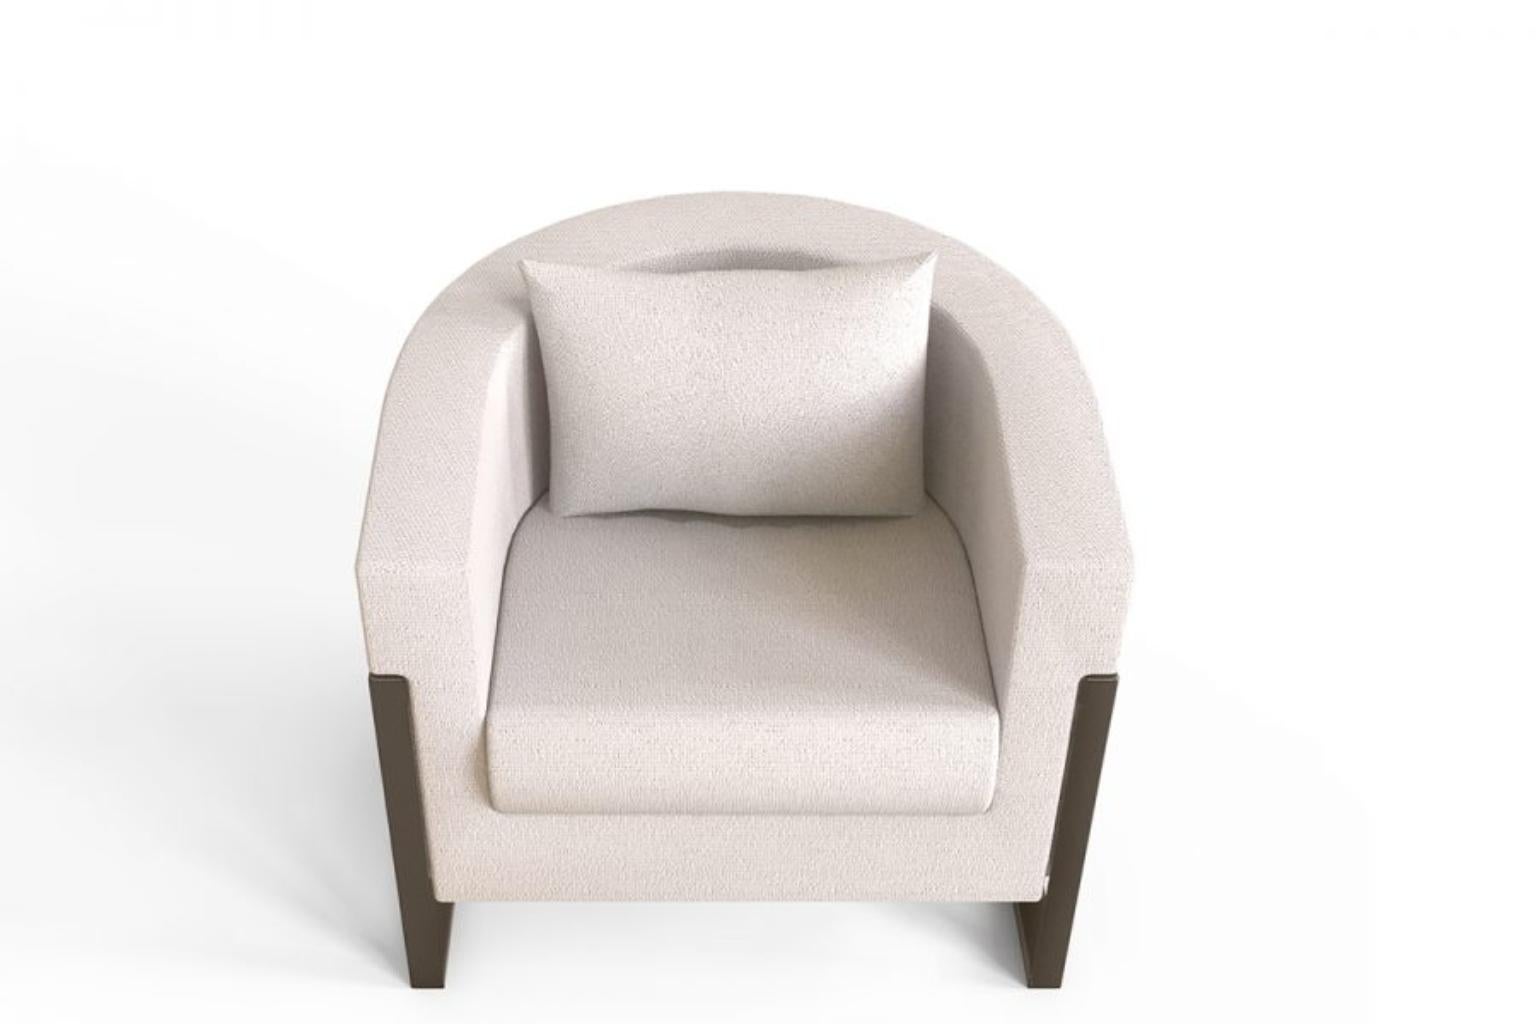 Minimalist Colombia White Bouclé Fabric Armchair by Caffe Latte

This Minimalist Colombia White Bouclé Fabric Armchair by Caffe Latte, inspired by the Colombia coffee is made from bouclé fabric and epoxy iron bronze matte varnish. A modern armchair